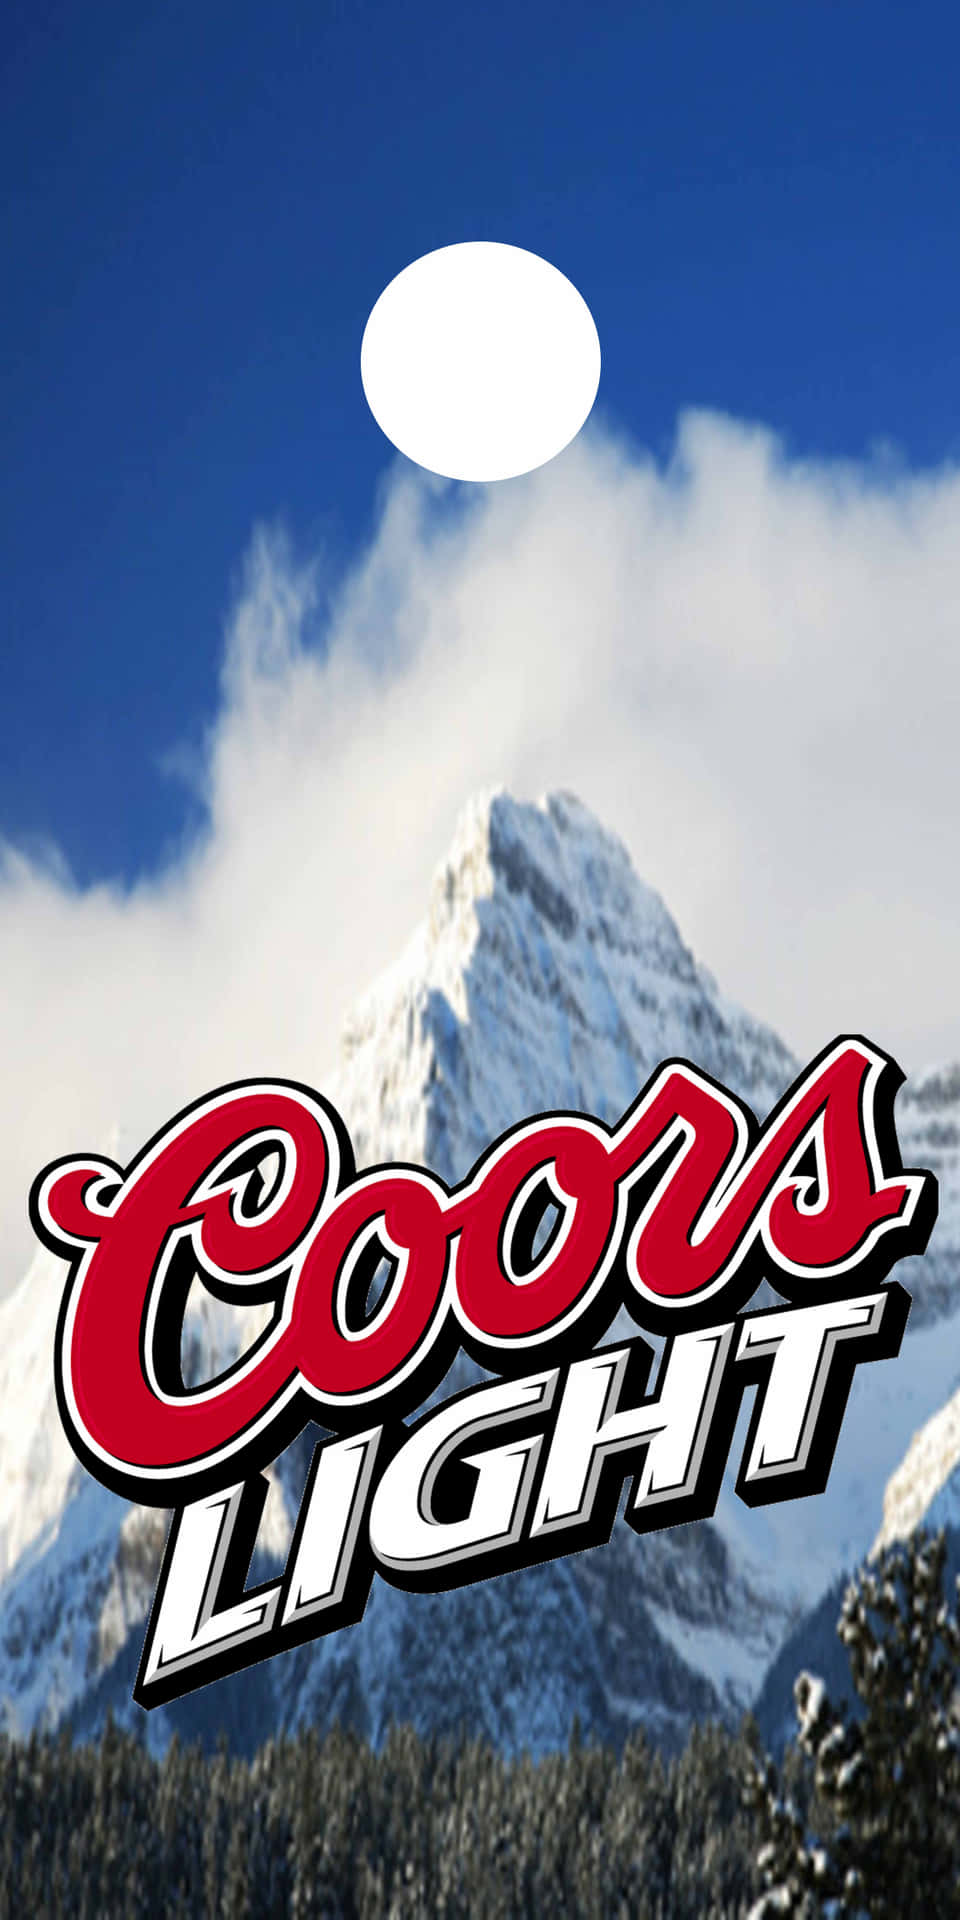 Cold Coors Light for a Hot Day Wallpaper